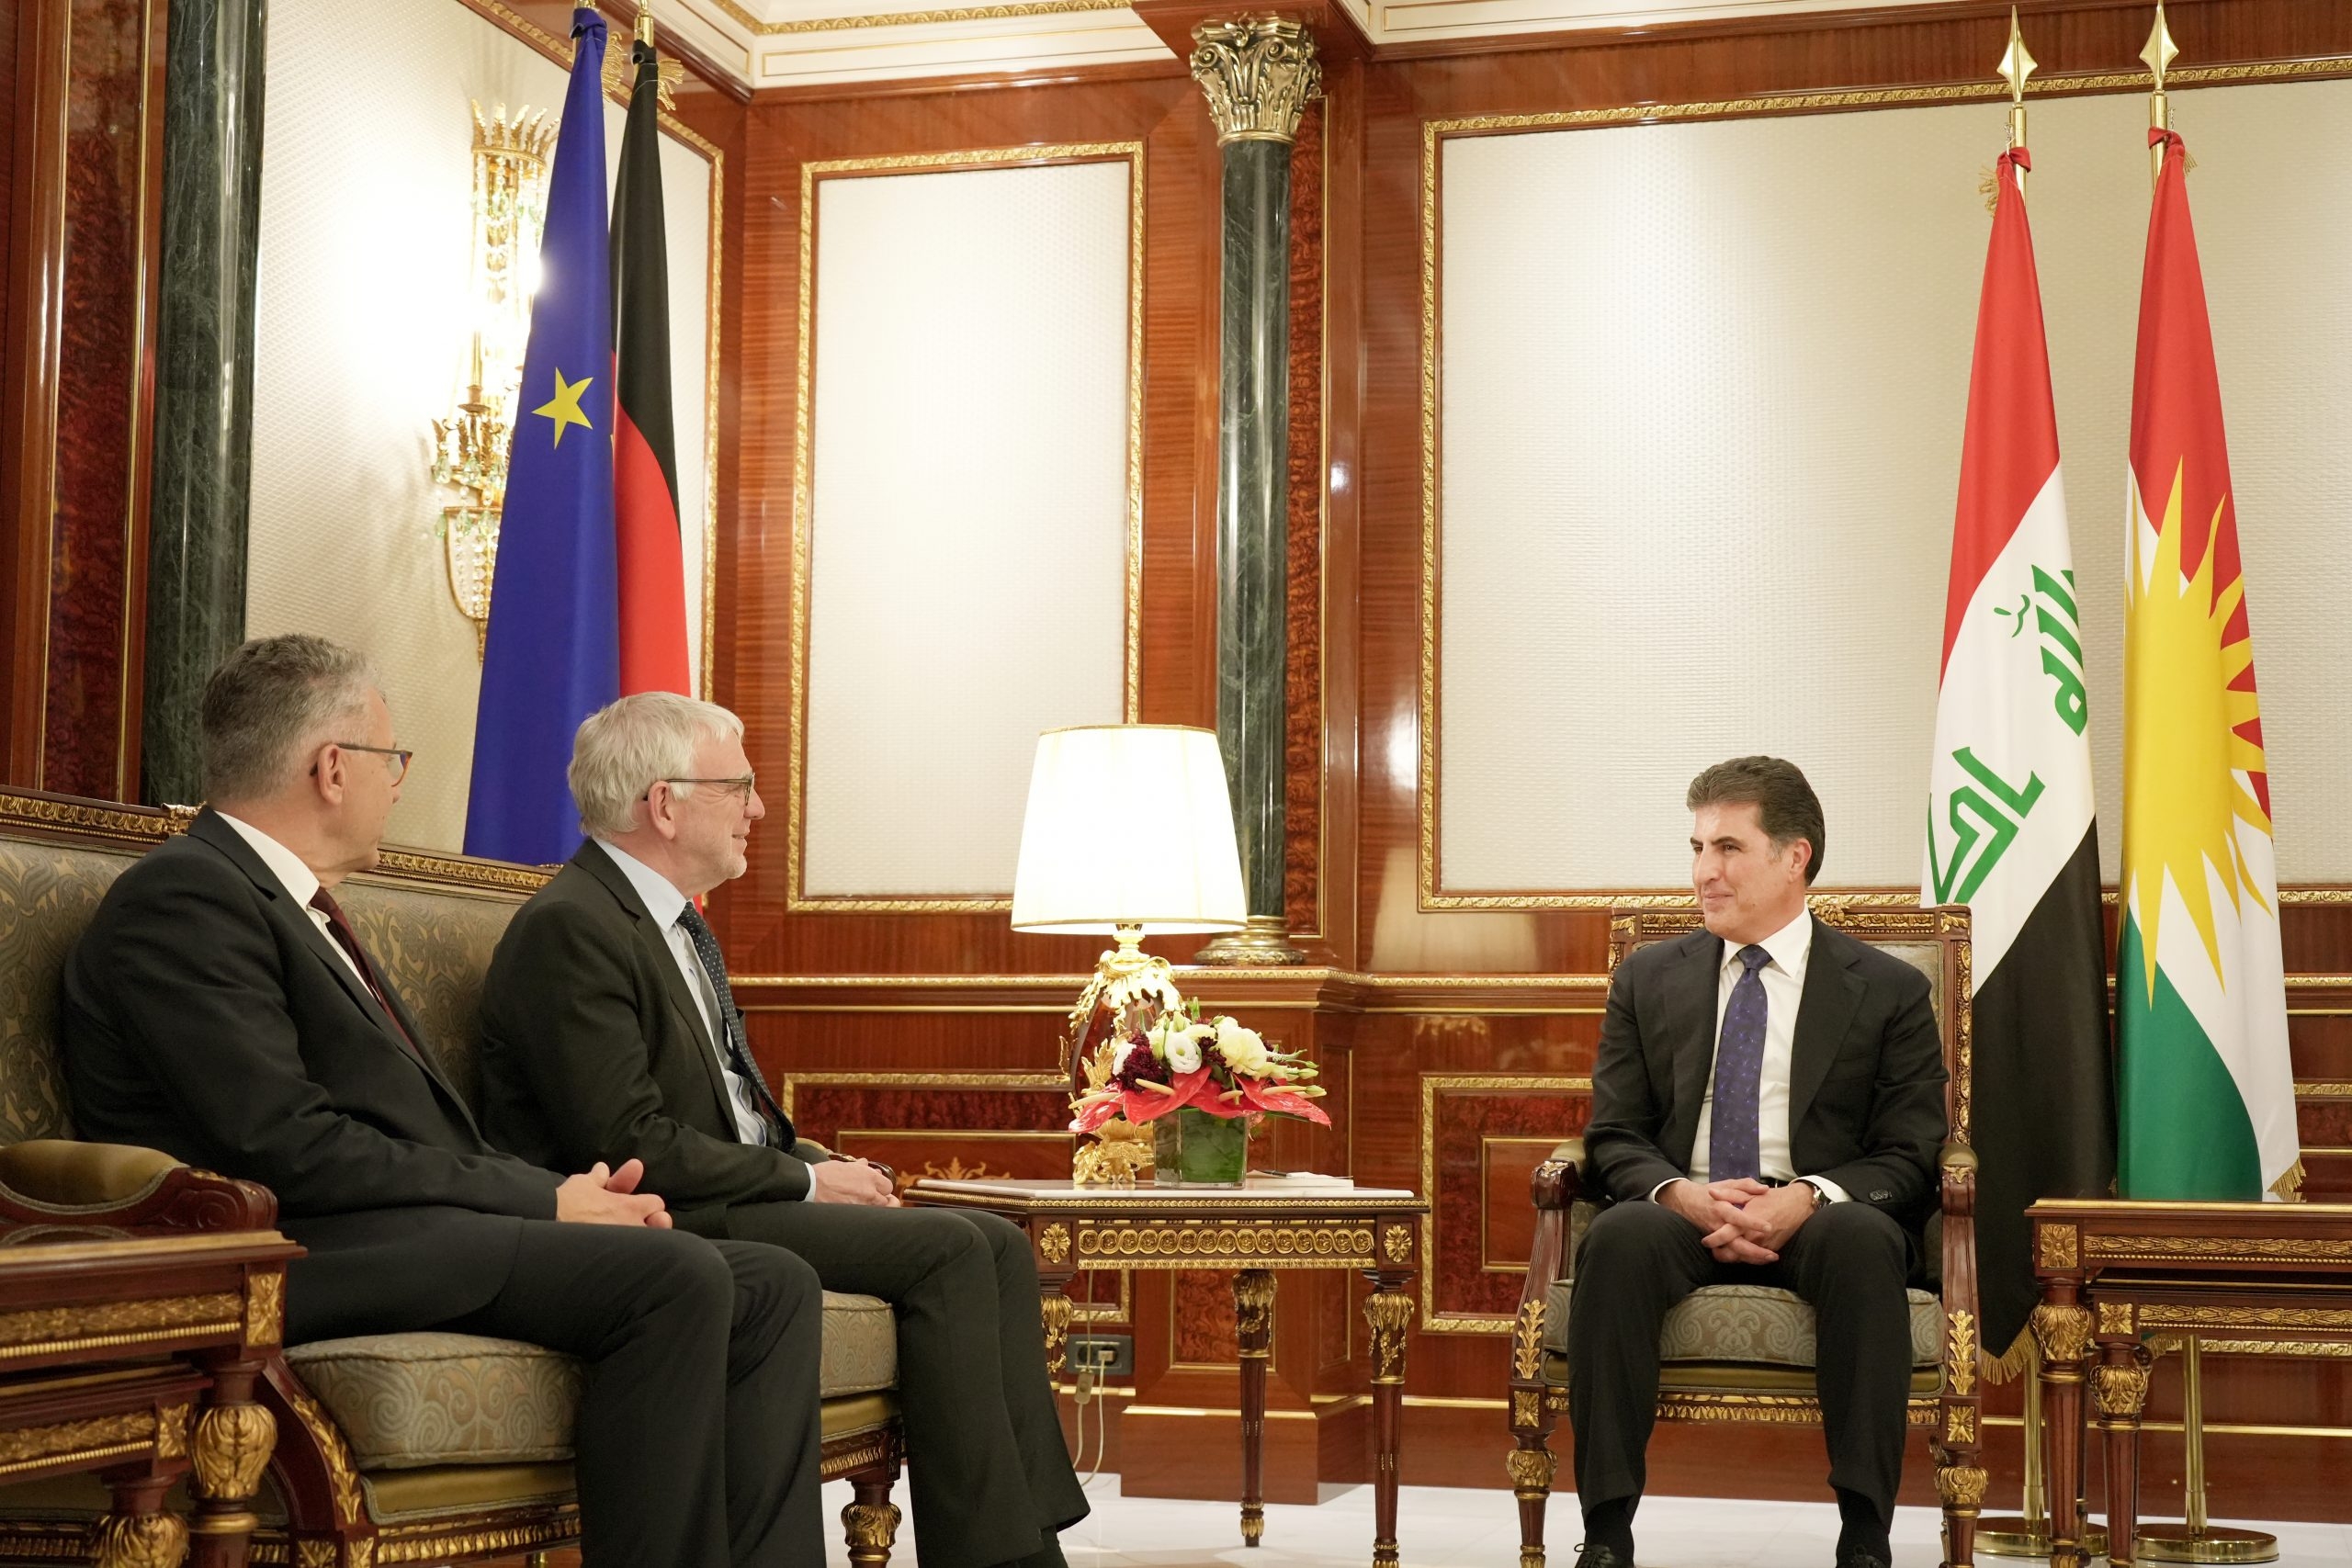 President Nechirvan Barzani meets with a high-level delegation from Germany